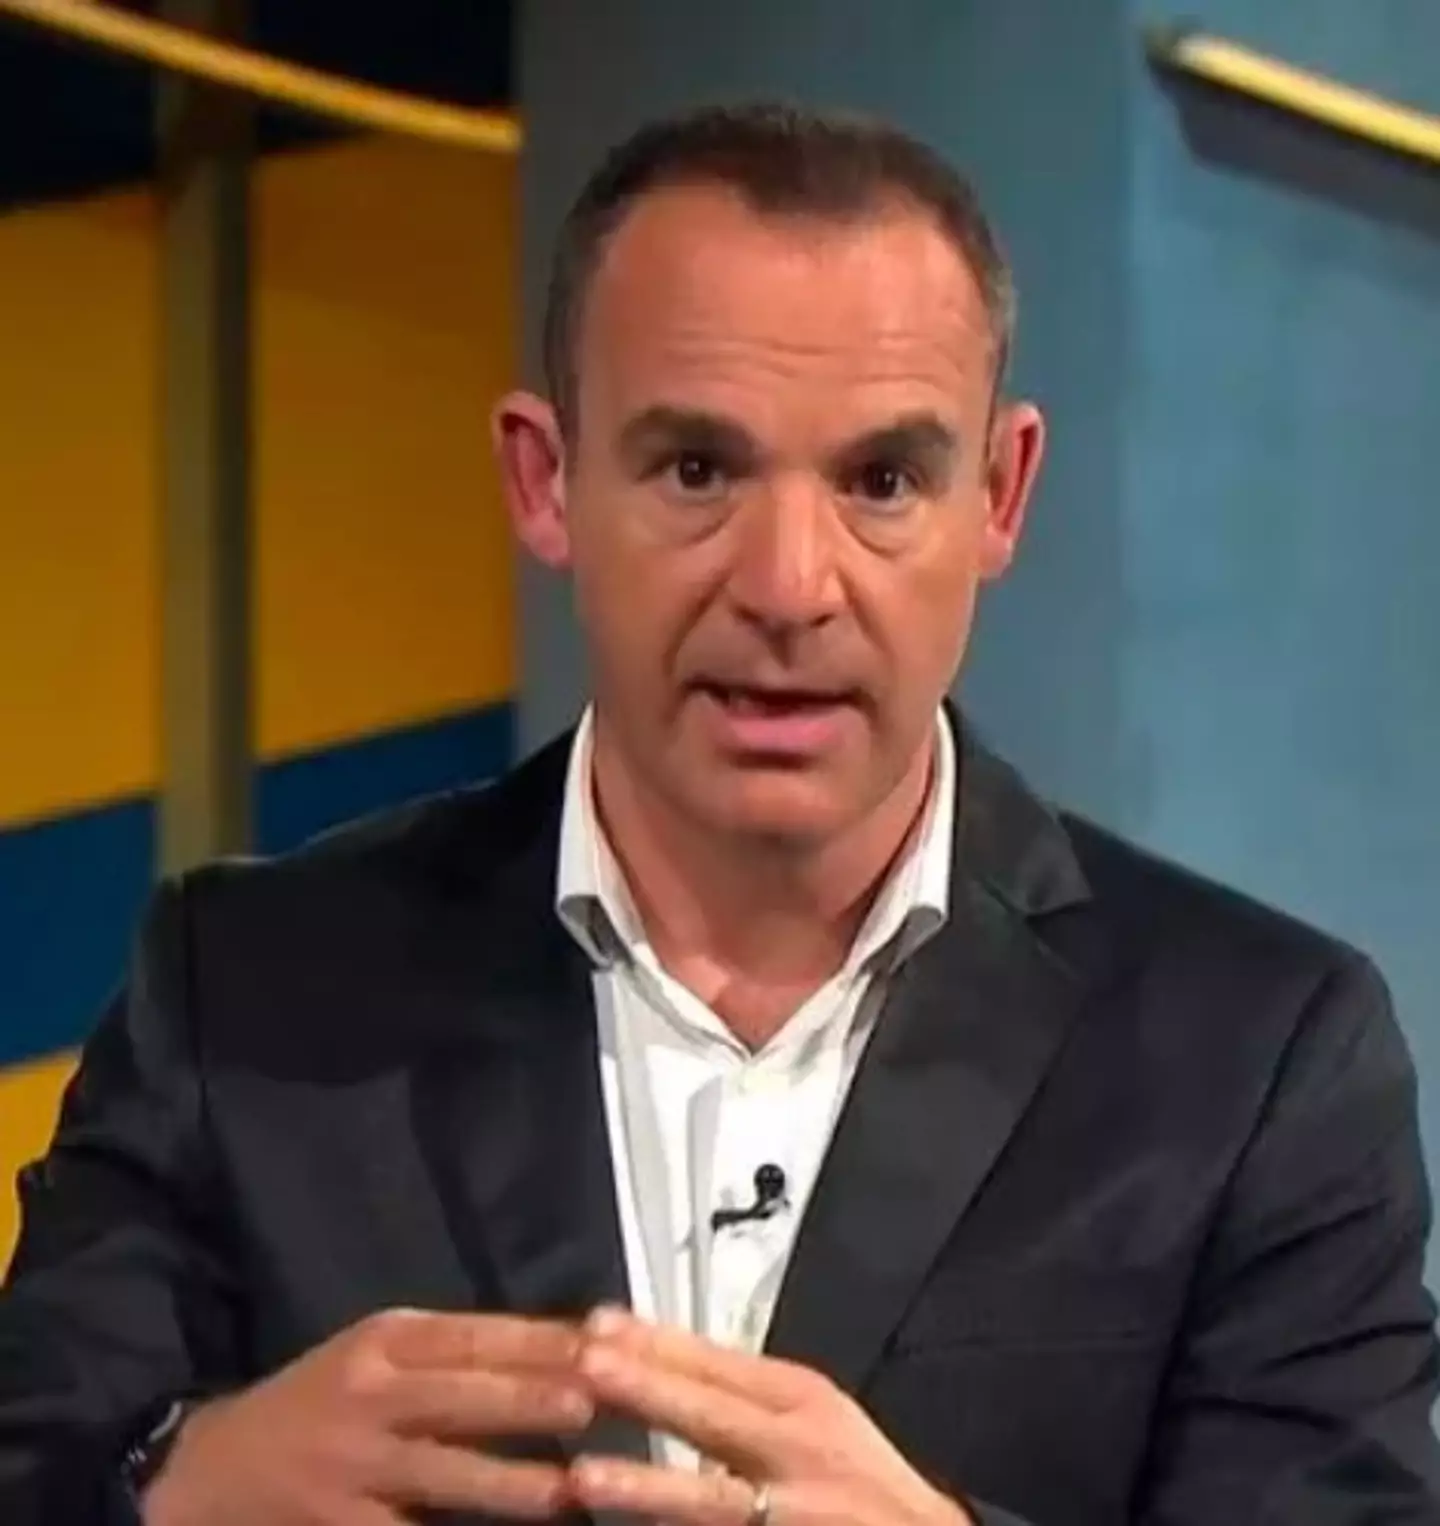 Martin Lewis shared some tips for Brits feeling the pinch.